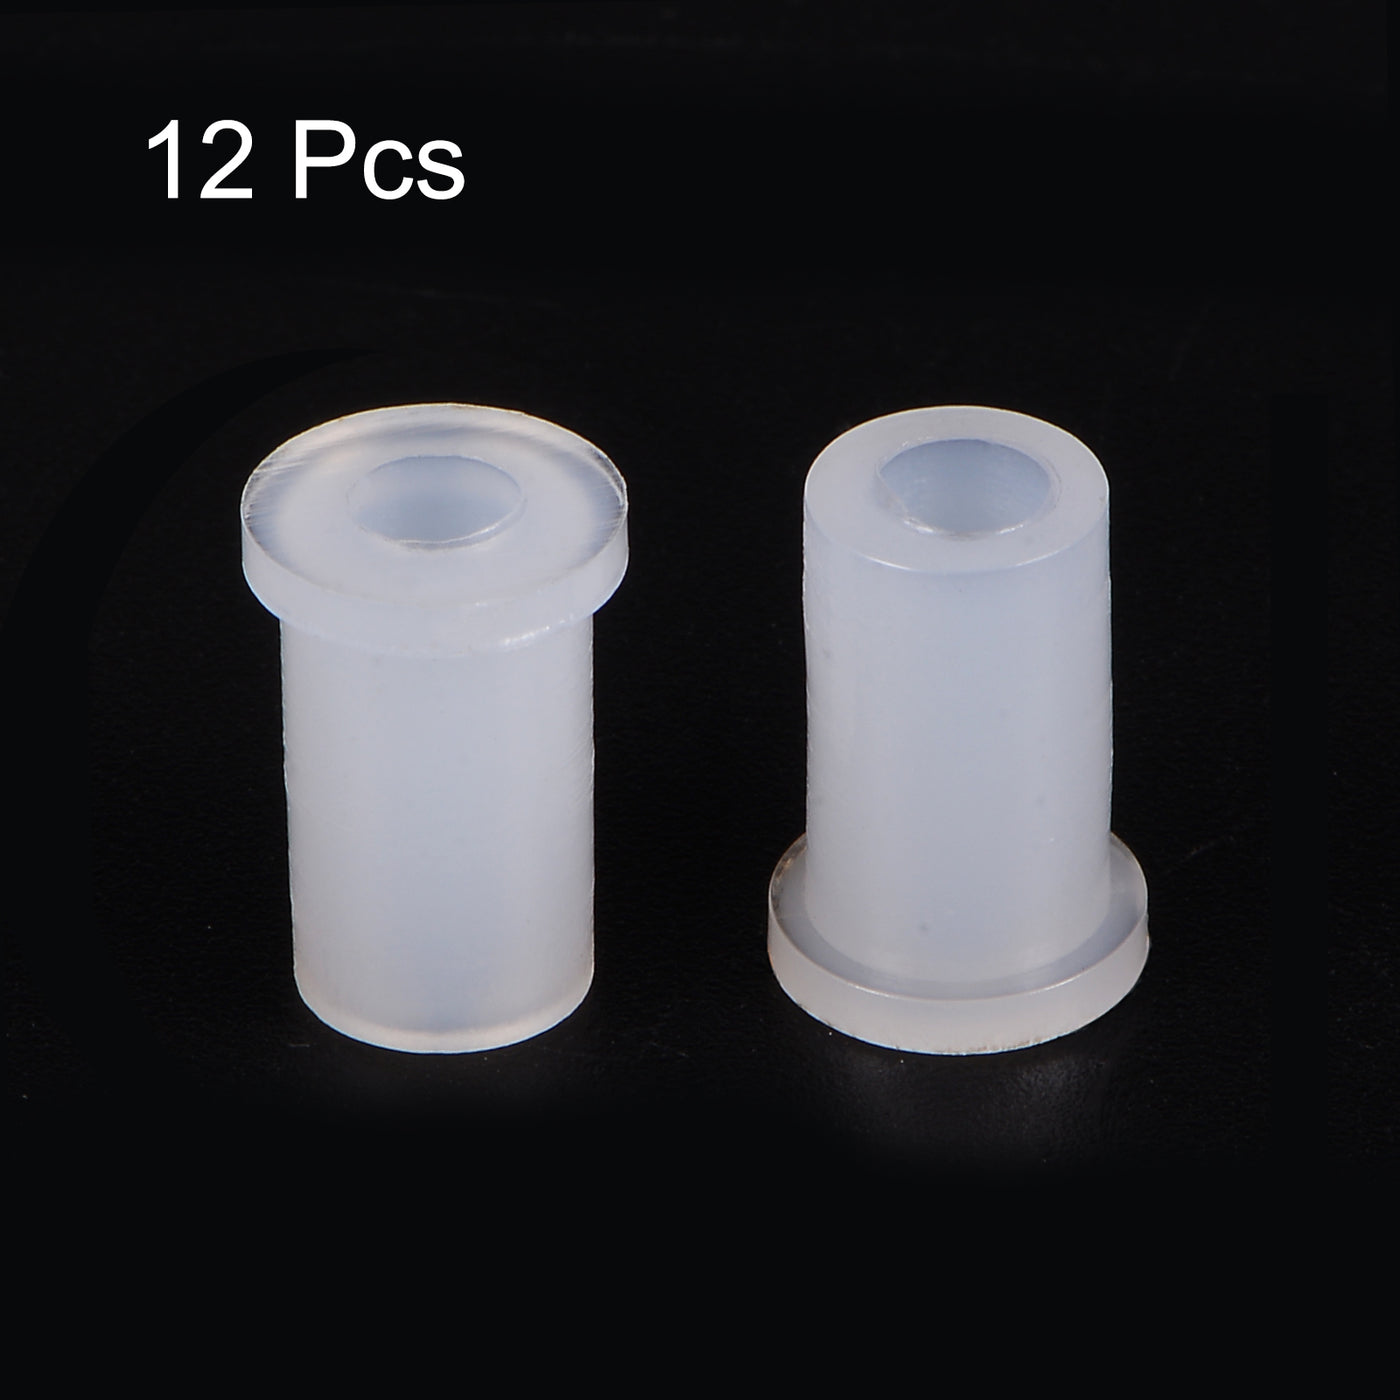 uxcell Uxcell 12pcs Flanged Sleeve Bearings 4mm ID 7.45mm OD 13mm Length Nylon Bushings, White